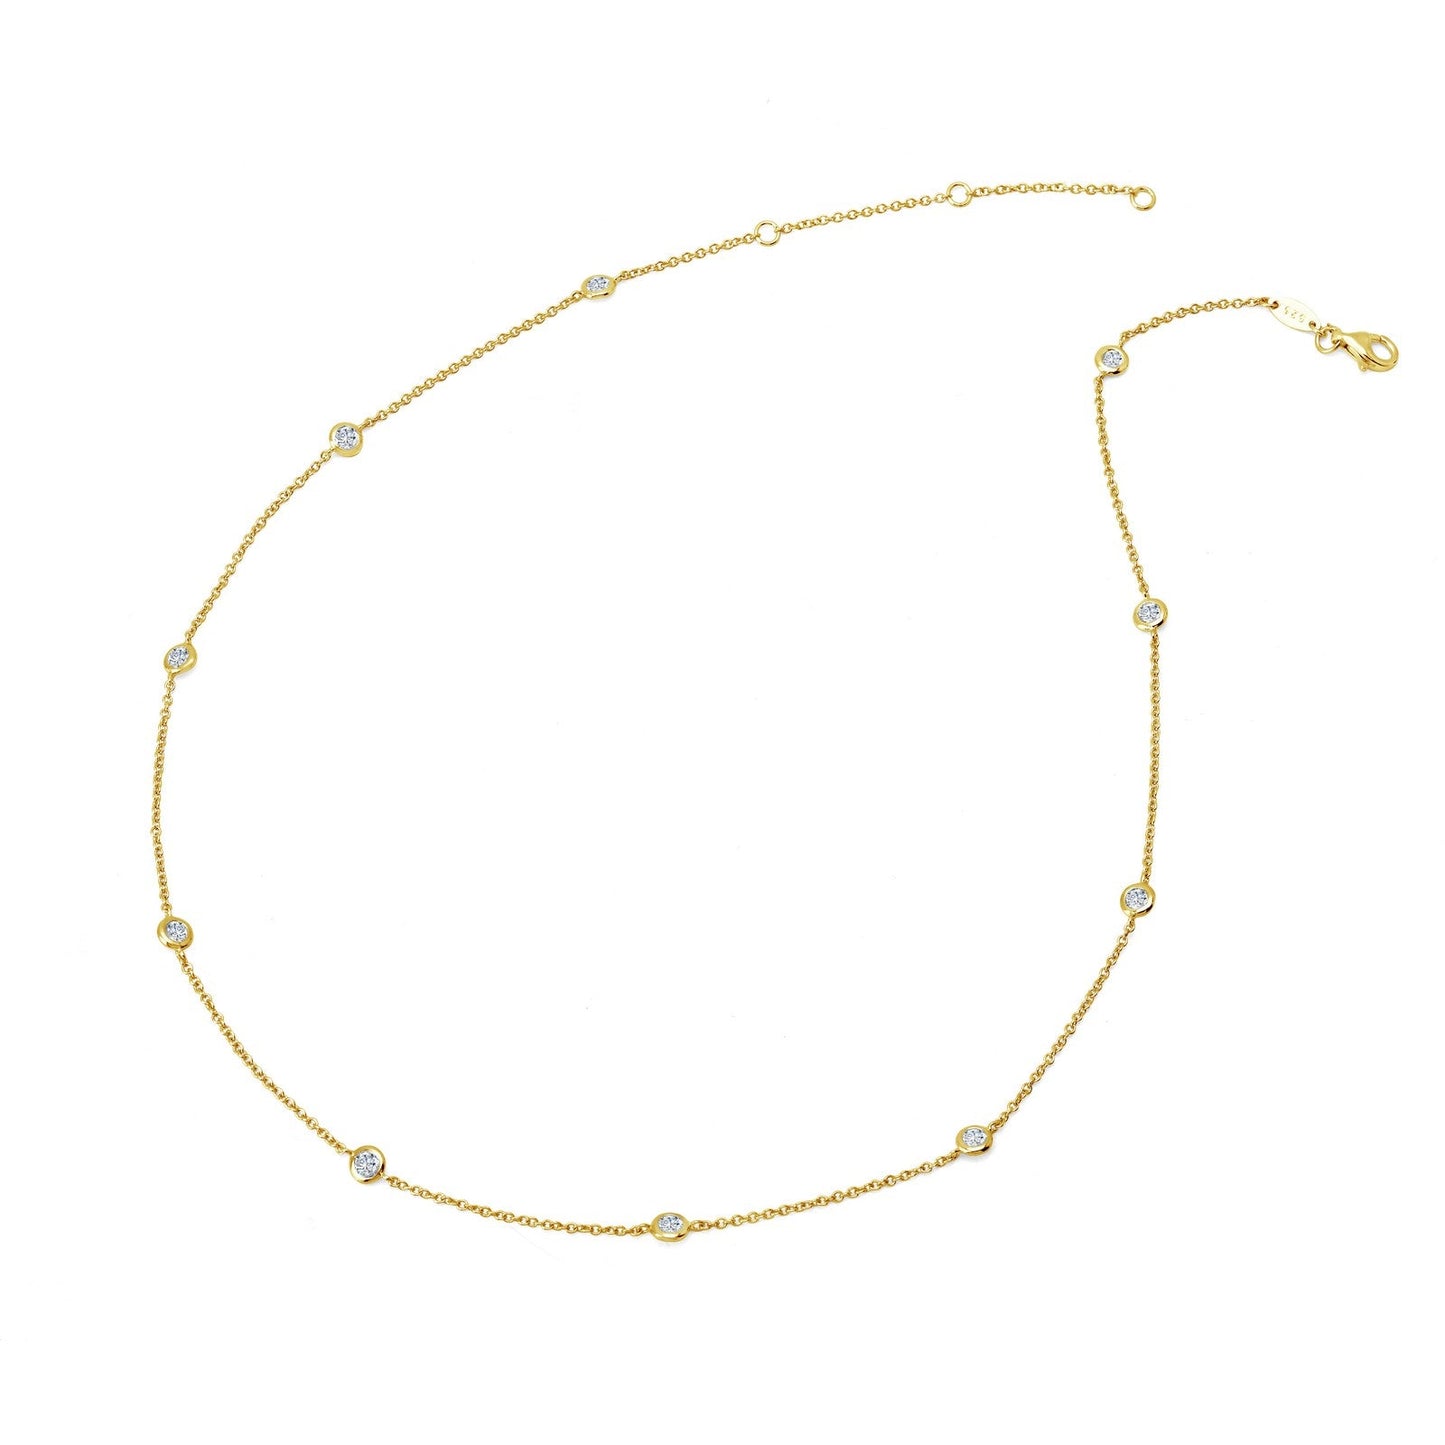 Lafonn Classic Station Necklace 11 Stone Count N0008CLG20